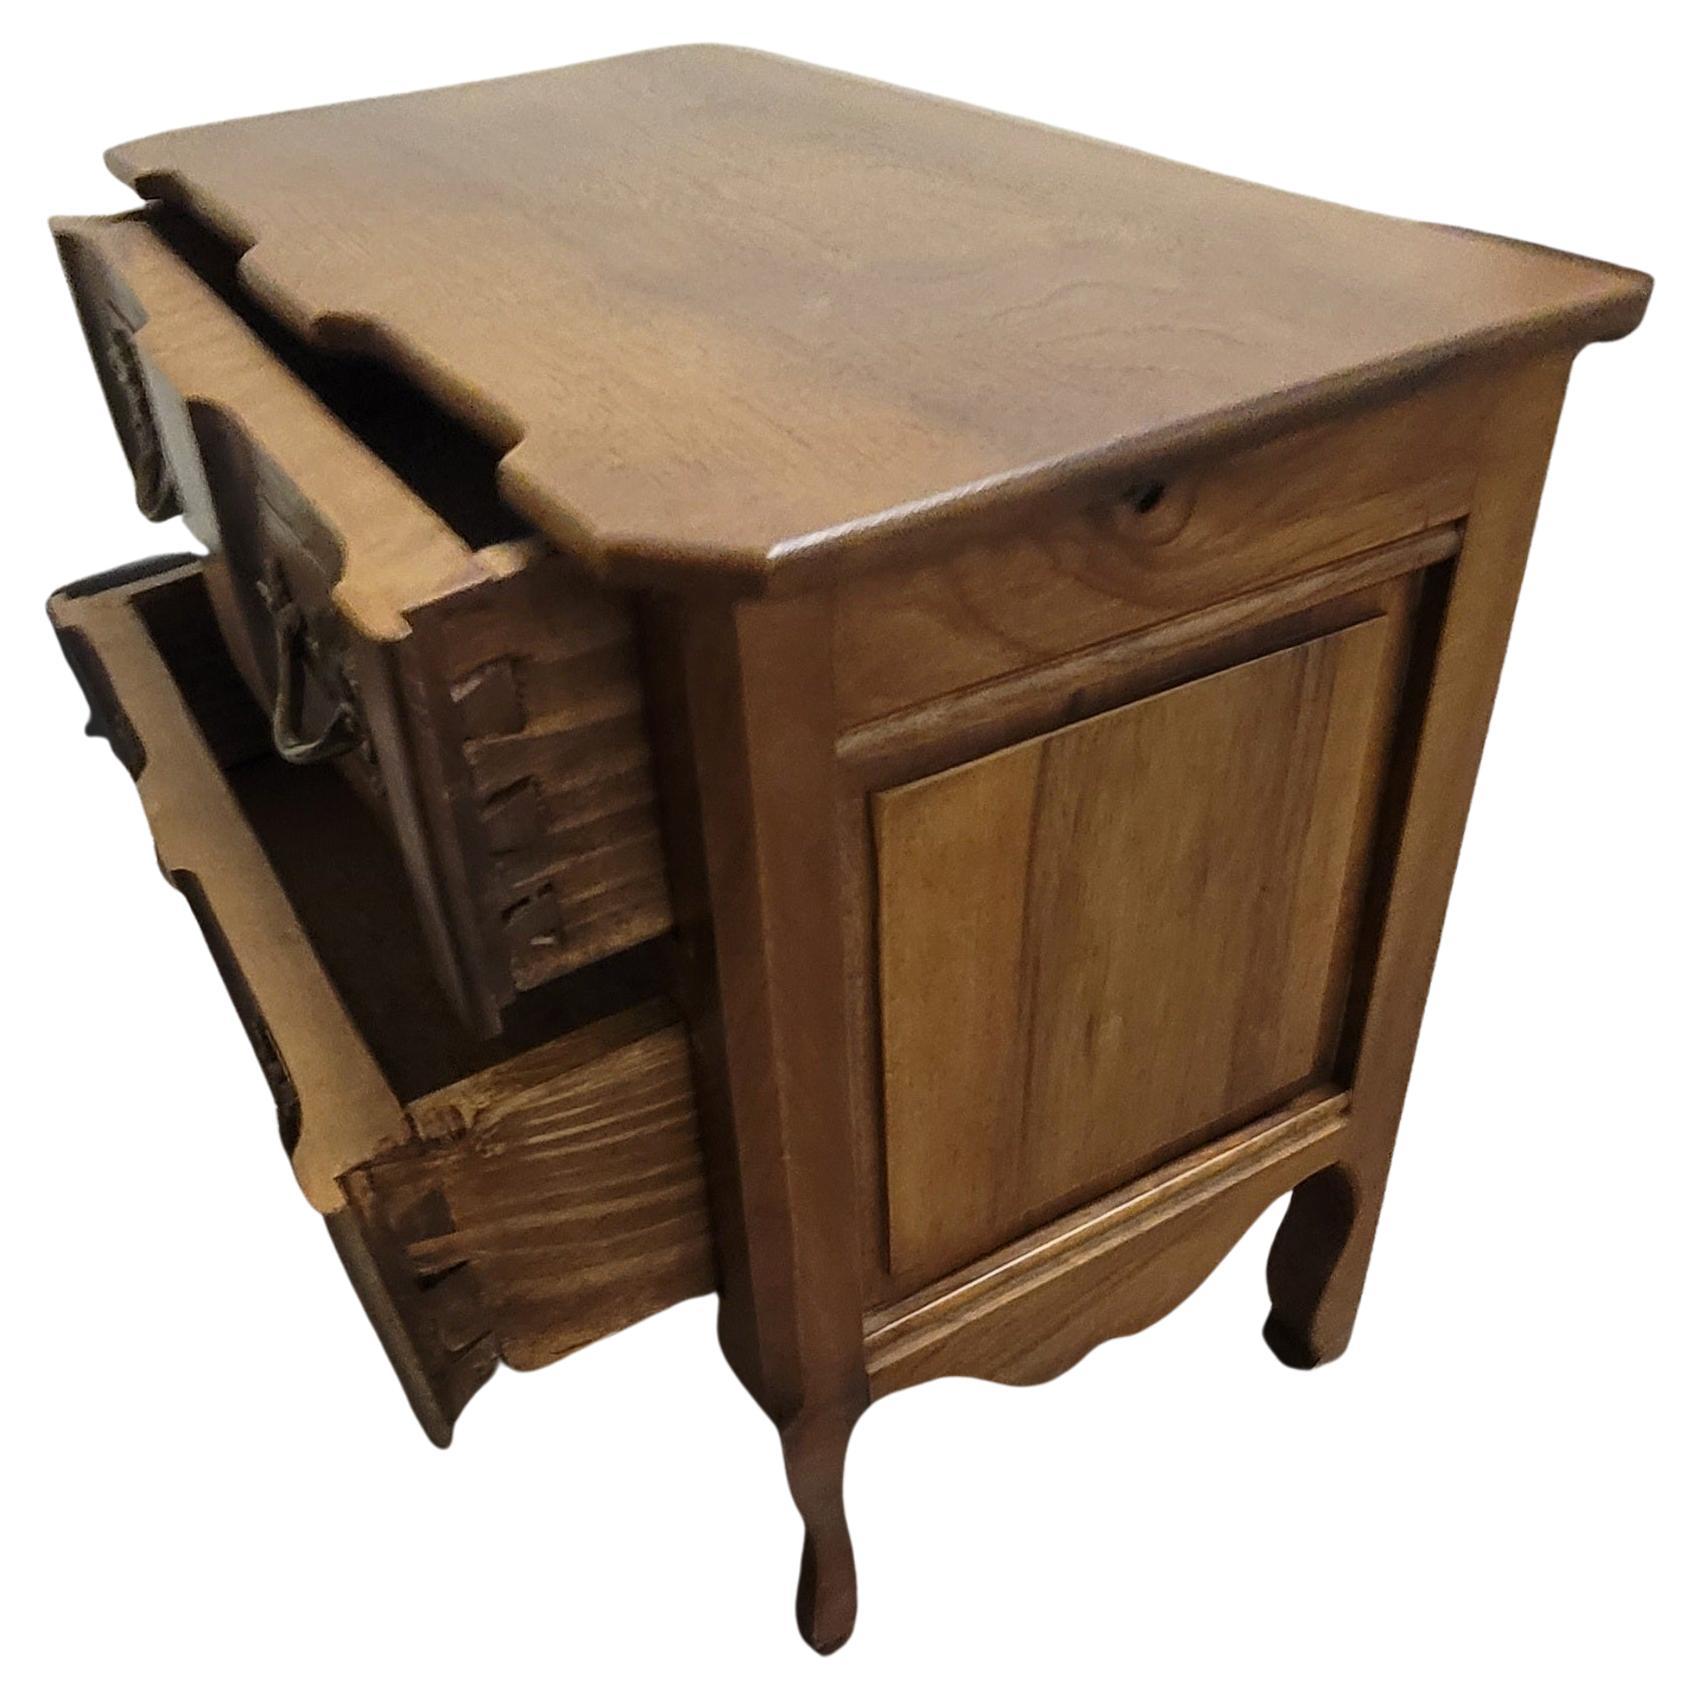 Hand-Crafted French Provincial Walnut Diminutive Commode w/ Hand-Rubbed Finish For Sale 3